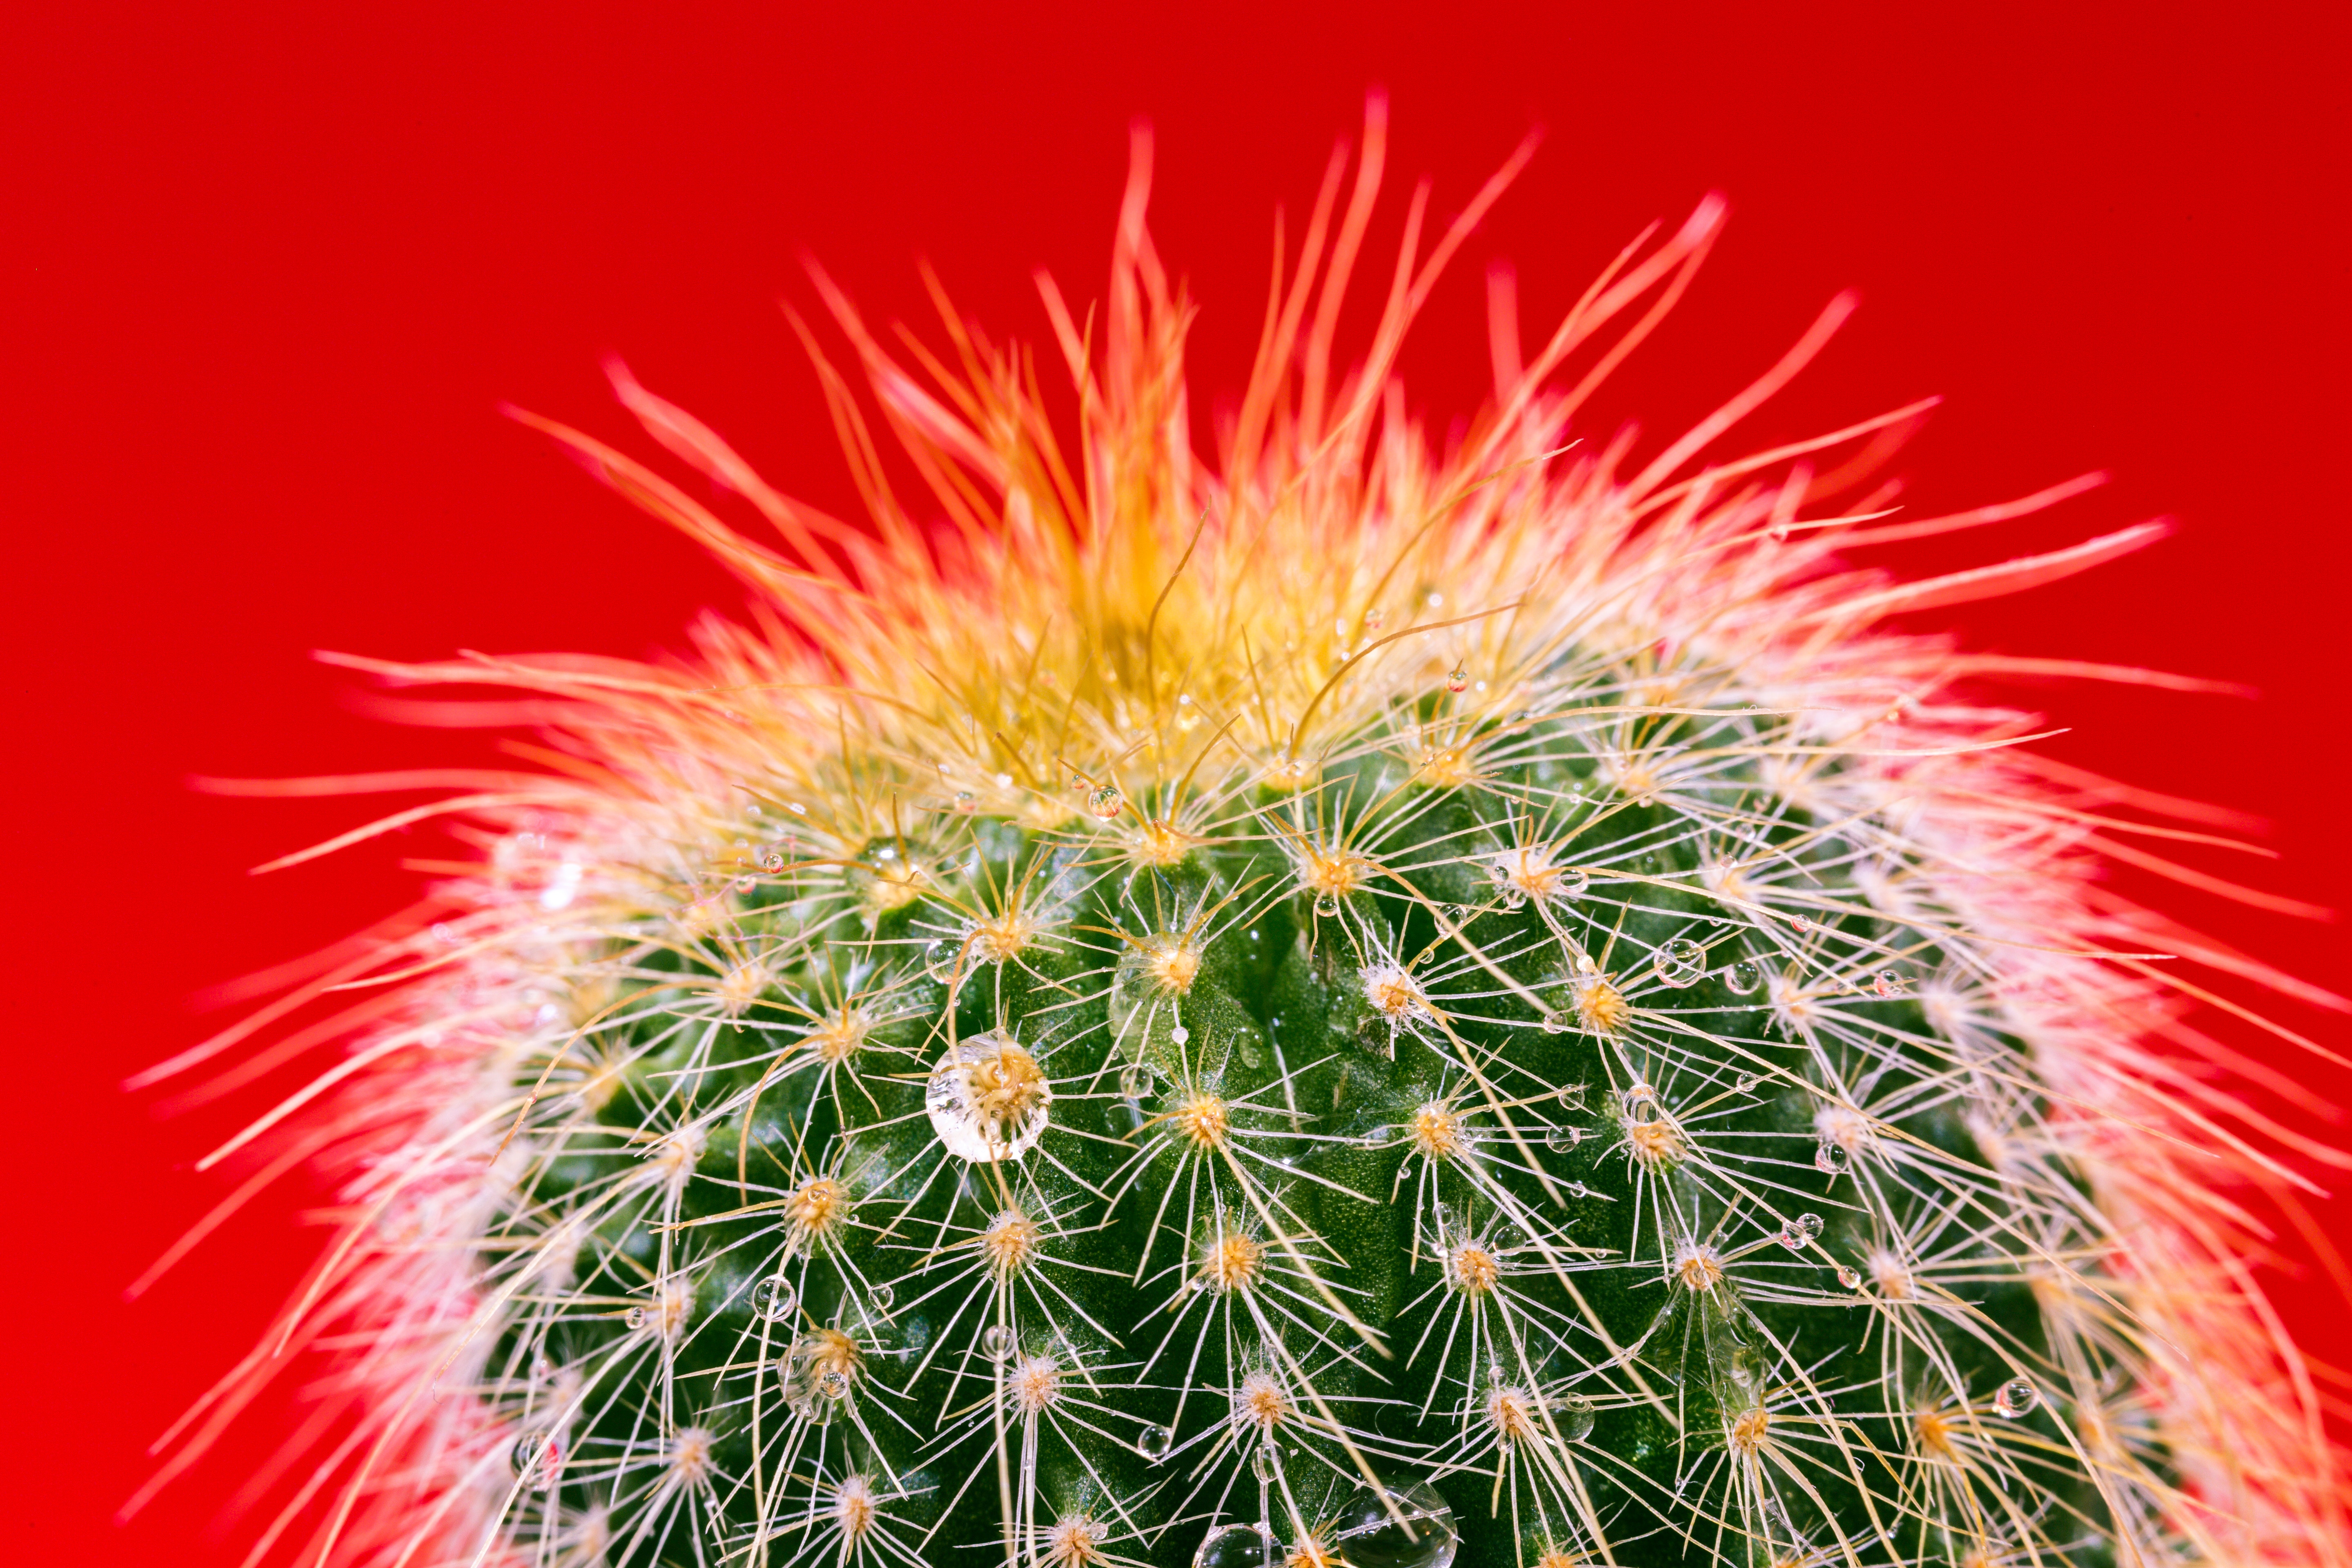 148899 download wallpaper needle, drops, macro, cactus screensavers and pictures for free